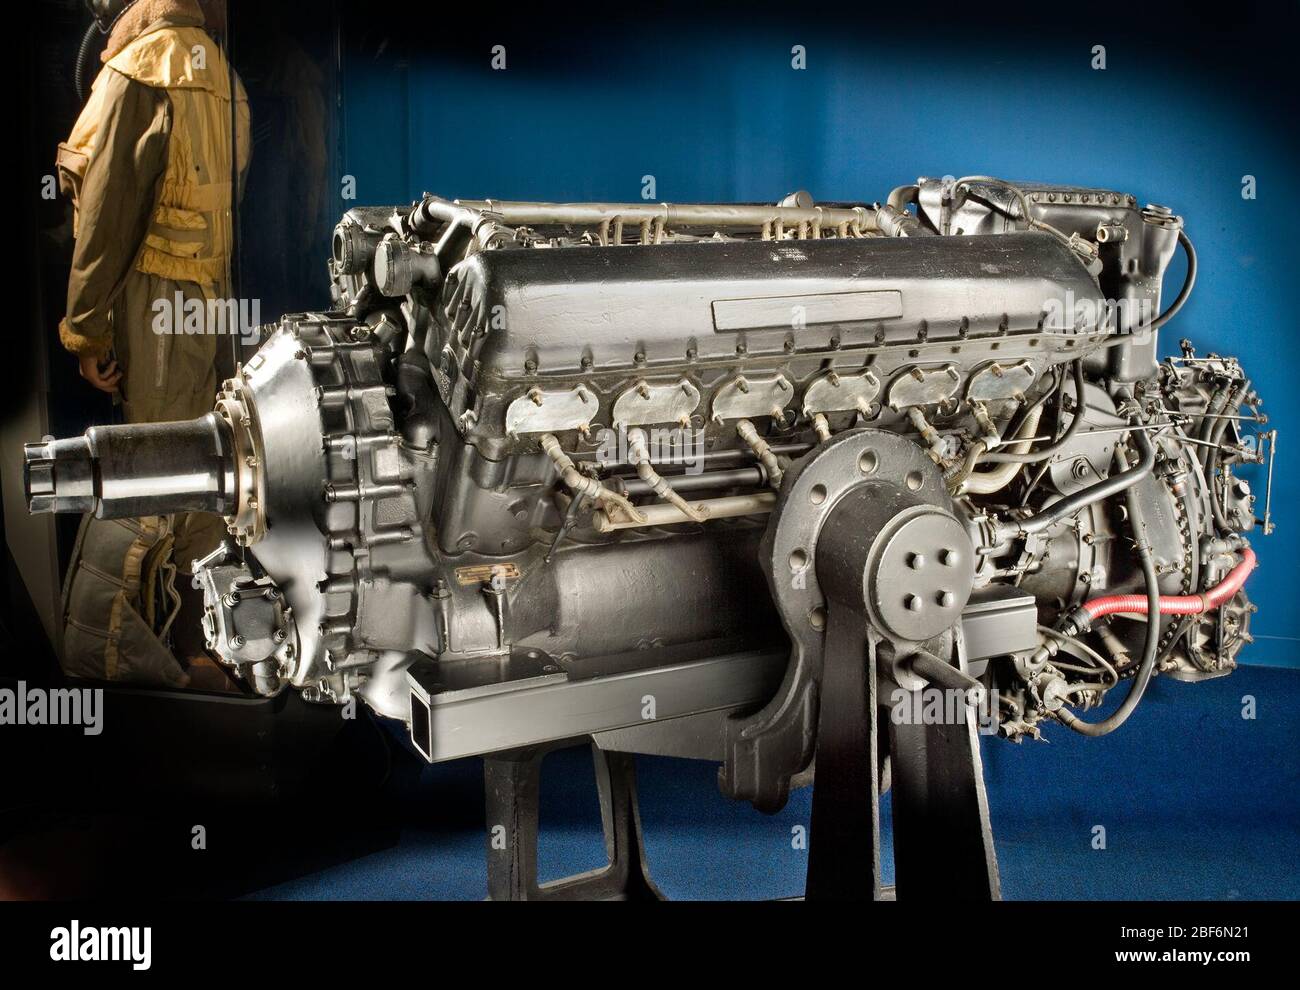 RollsRoyce Merlin RM 14SM Mk 100 V12 Engine. Type: Reciprocating, V-type, 12 cylinders, pressure liquid cooled, superchargedPower rating: 1,227 kW (1,645 hp) at 3,000 rpmDisplacement: 27 L (1,649 cu in.)Bore and Stroke: 137.16 mm (5.4 in.) x 152.4 mm (6 in.)Weight: 778 kg (1,715 lb)Formed in 1906 to produce automobiles, Rol Stock Photo